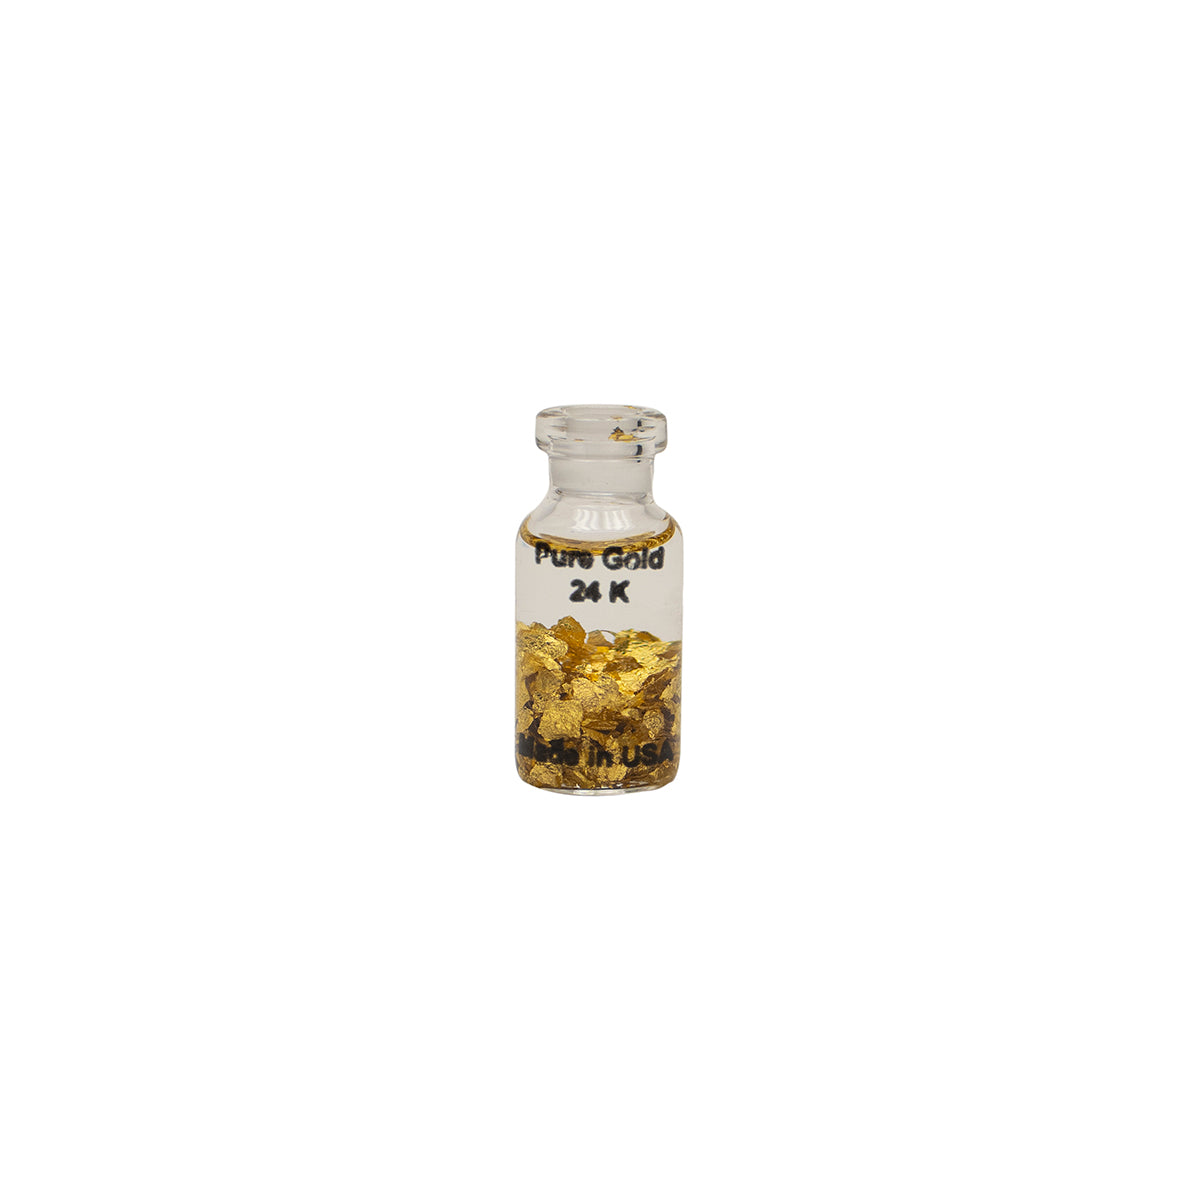 12 Bottles of Beautiful Large Gold Leaf Flakes .. Lowest price on the Net